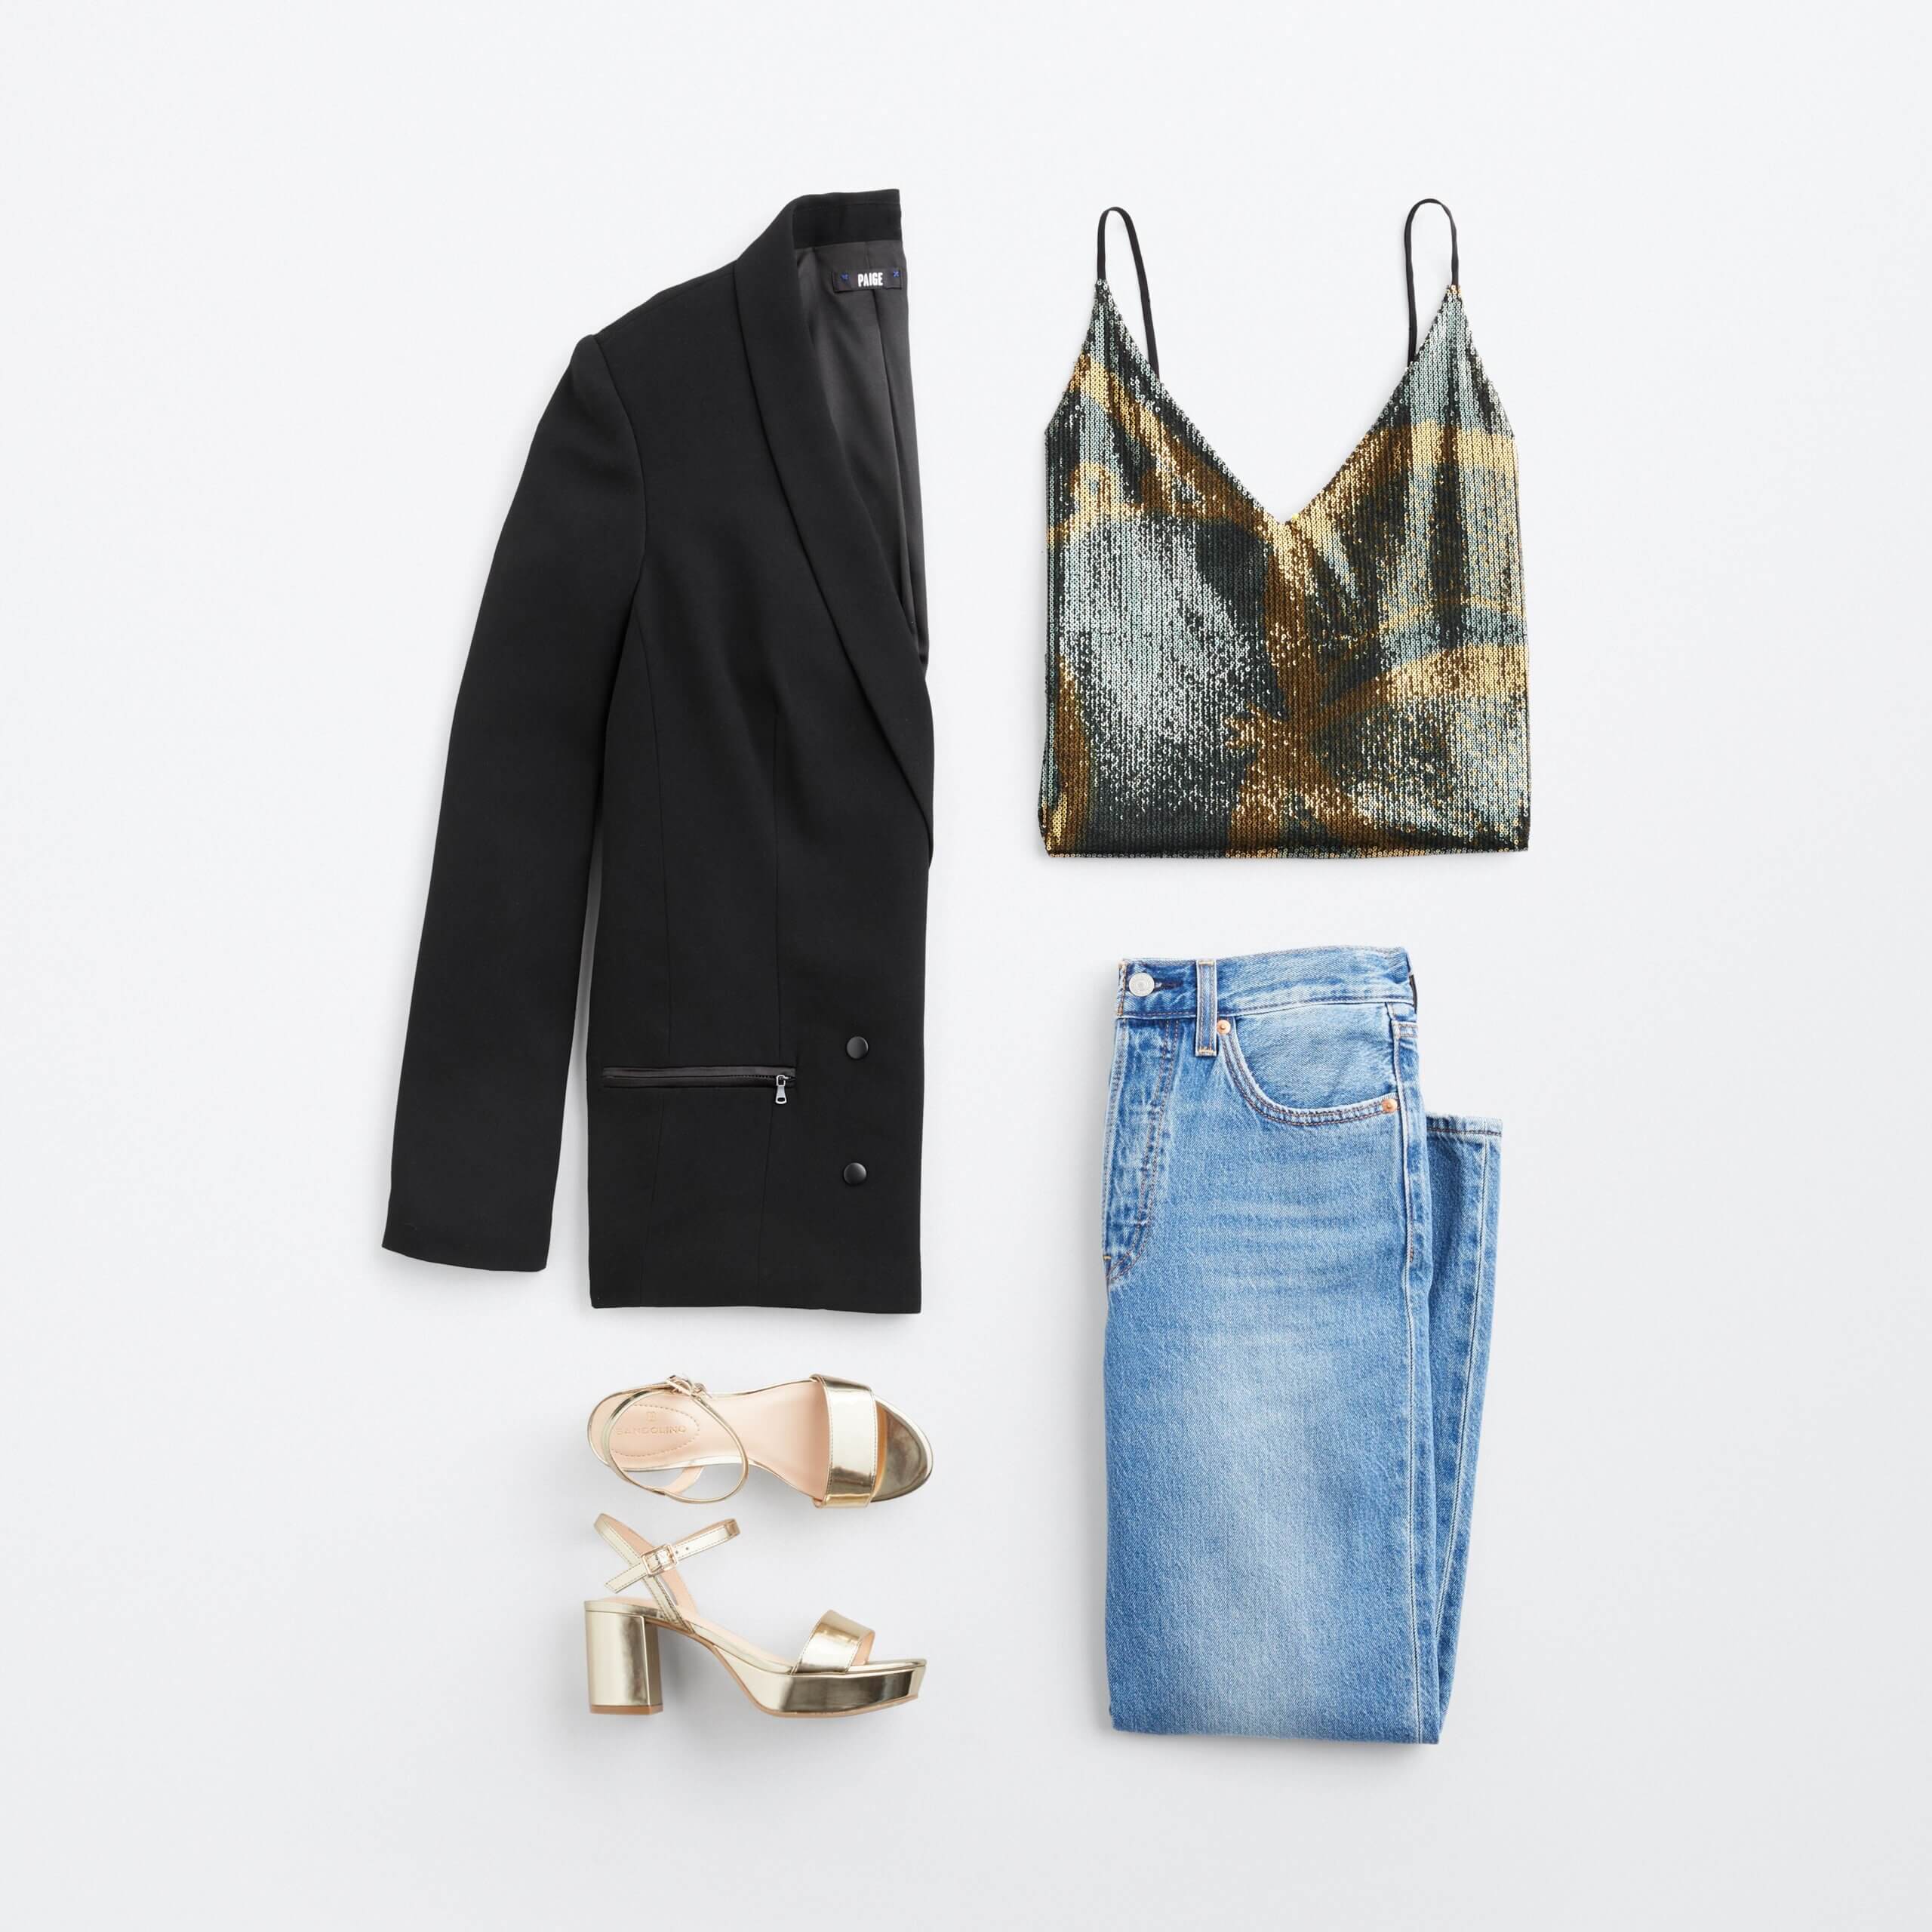 Stitch Fix women’s New Year’s Eve house party outfit with black blazer, gold and green sequin tank, gold heels and blue jeans.